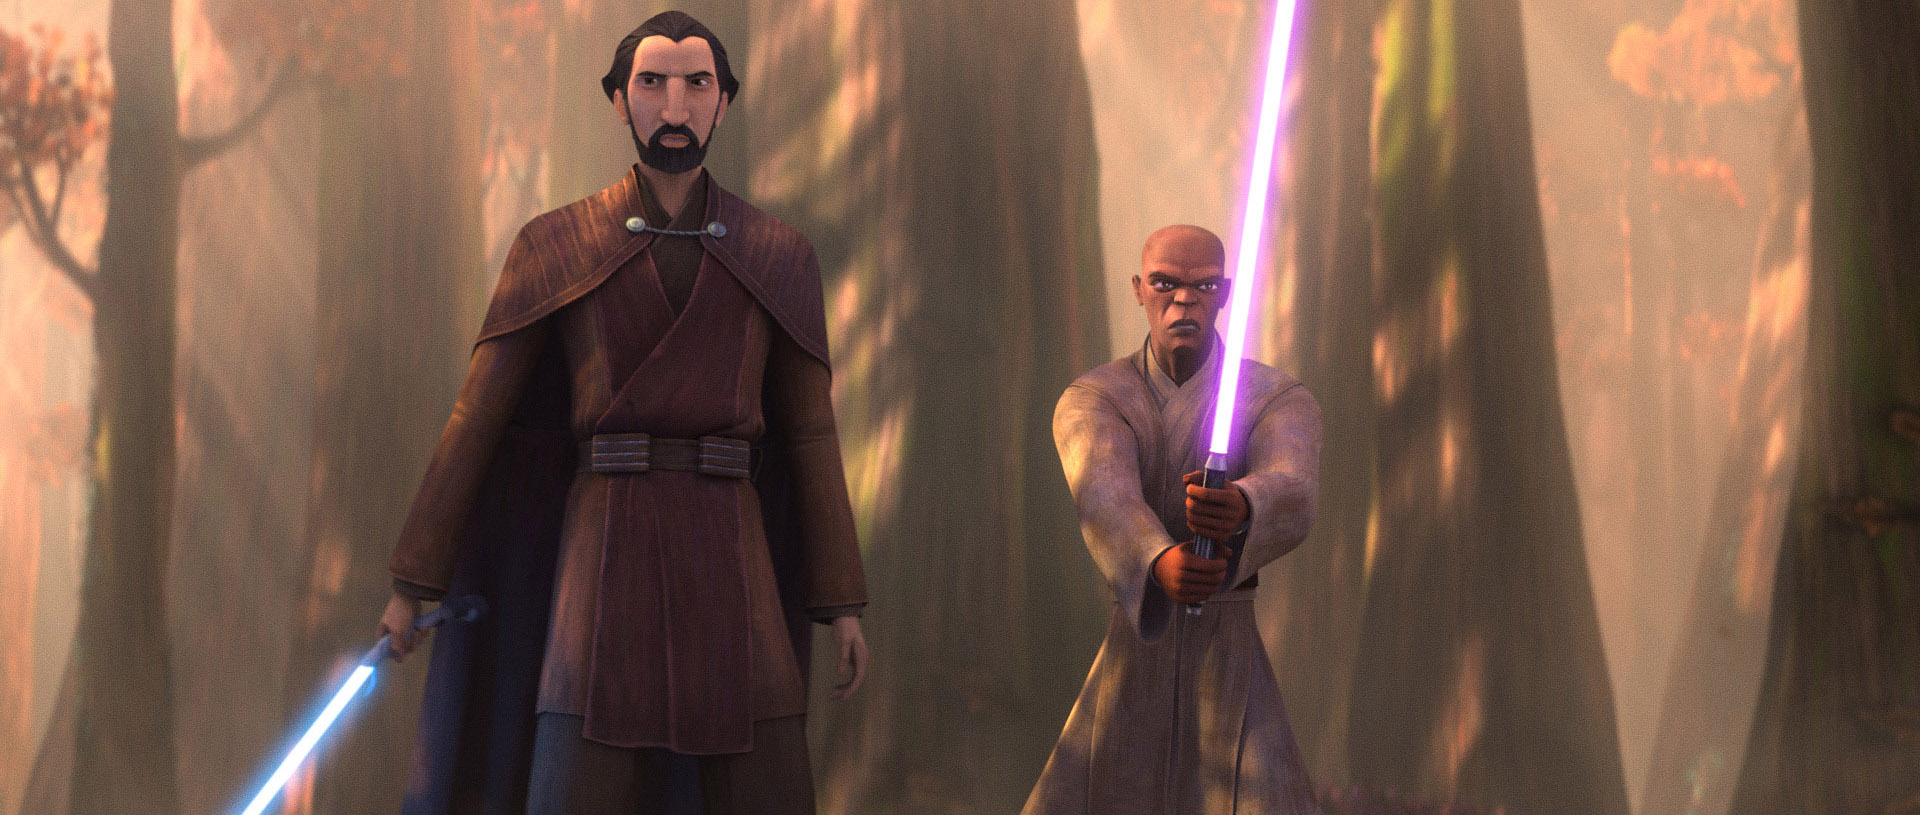 (S-D) Conte Dooku e Mace Windu da Star Wars: Tales Of The Jedi [credit: Lucasfilm; Copyright 2022 Lucasfilm Ltd. and TM. All Rights Reserved; courtesy of Disney]